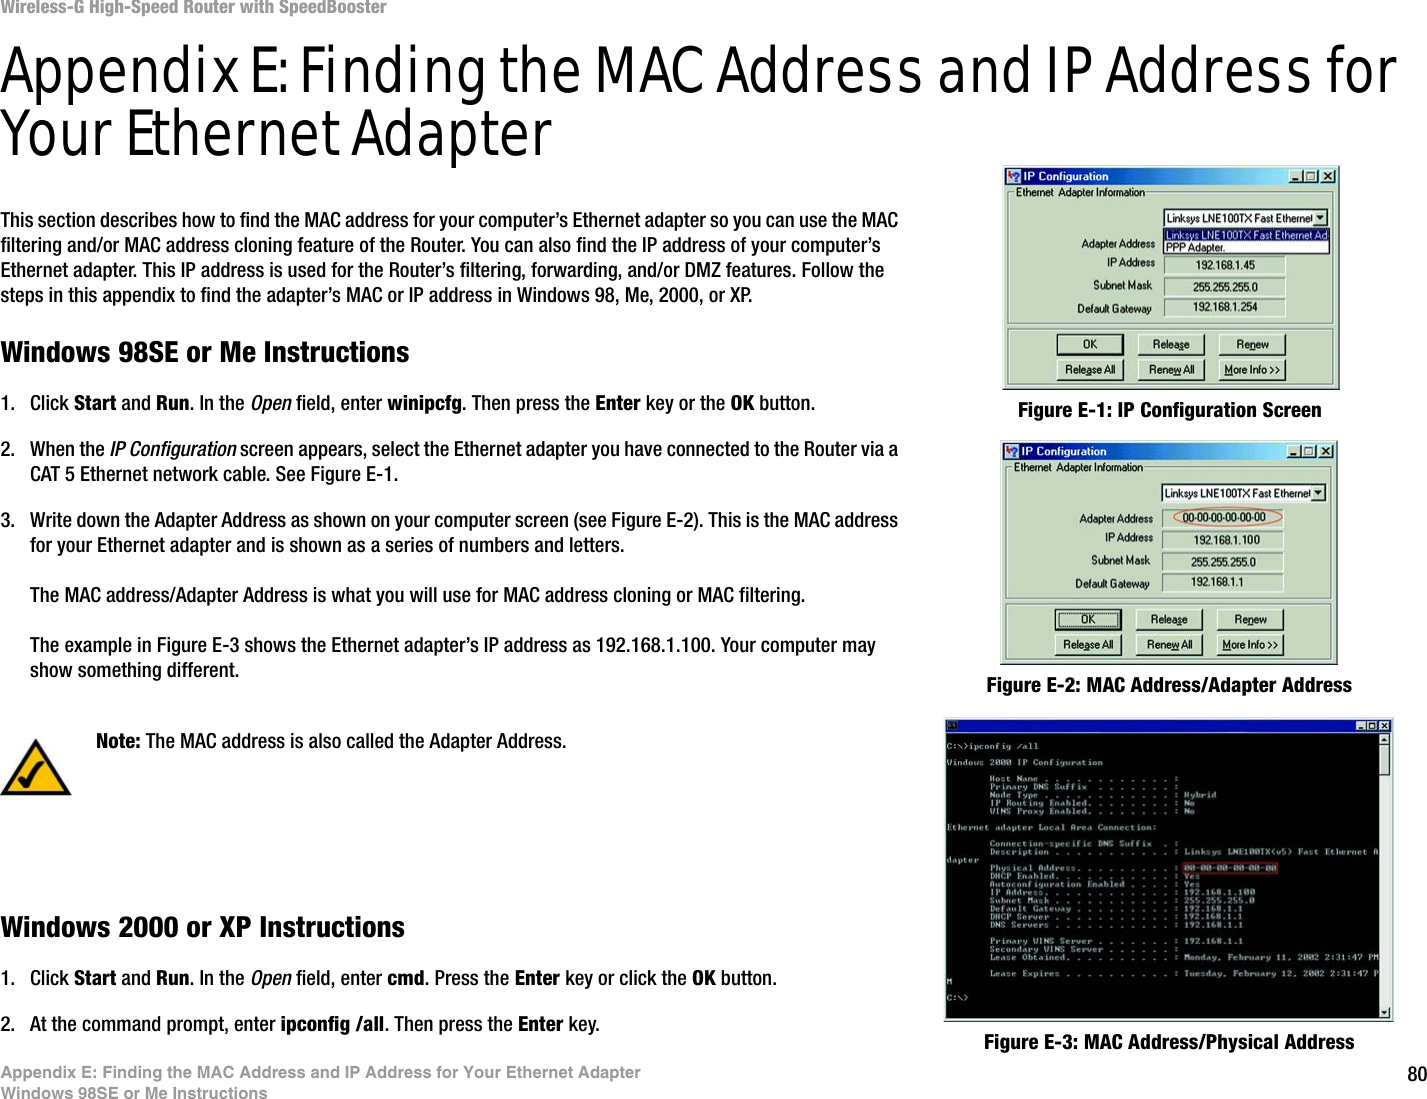 80Appendix E: Finding the MAC Address and IP Address for Your Ethernet AdapterWindows 98SE or Me InstructionsWireless-G High-Speed Router with SpeedBoosterAppendix E: Finding the MAC Address and IP Address for Your Ethernet AdapterThis section describes how to find the MAC address for your computer’s Ethernet adapter so you can use the MAC filtering and/or MAC address cloning feature of the Router. You can also find the IP address of your computer’s Ethernet adapter. This IP address is used for the Router’s filtering, forwarding, and/or DMZ features. Follow the steps in this appendix to find the adapter’s MAC or IP address in Windows 98, Me, 2000, or XP.Windows 98SE or Me Instructions1. Click Start and Run. In the Open field, enter winipcfg. Then press the Enter key or the OK button. 2. When the IP Configuration screen appears, select the Ethernet adapter you have connected to the Router via a CAT 5 Ethernet network cable. See Figure E-1.3. Write down the Adapter Address as shown on your computer screen (see Figure E-2). This is the MAC address for your Ethernet adapter and is shown as a series of numbers and letters.The MAC address/Adapter Address is what you will use for MAC address cloning or MAC filtering.The example in Figure E-3 shows the Ethernet adapter’s IP address as 192.168.1.100. Your computer may show something different.Windows 2000 or XP Instructions1. Click Start and Run. In the Open field, enter cmd. Press the Enter key or click the OK button.2. At the command prompt, enter ipconfig /all. Then press the Enter key.Figure E-2: MAC Address/Adapter AddressFigure E-1: IP Configuration ScreenNote: The MAC address is also called the Adapter Address.Figure E-3: MAC Address/Physical Address